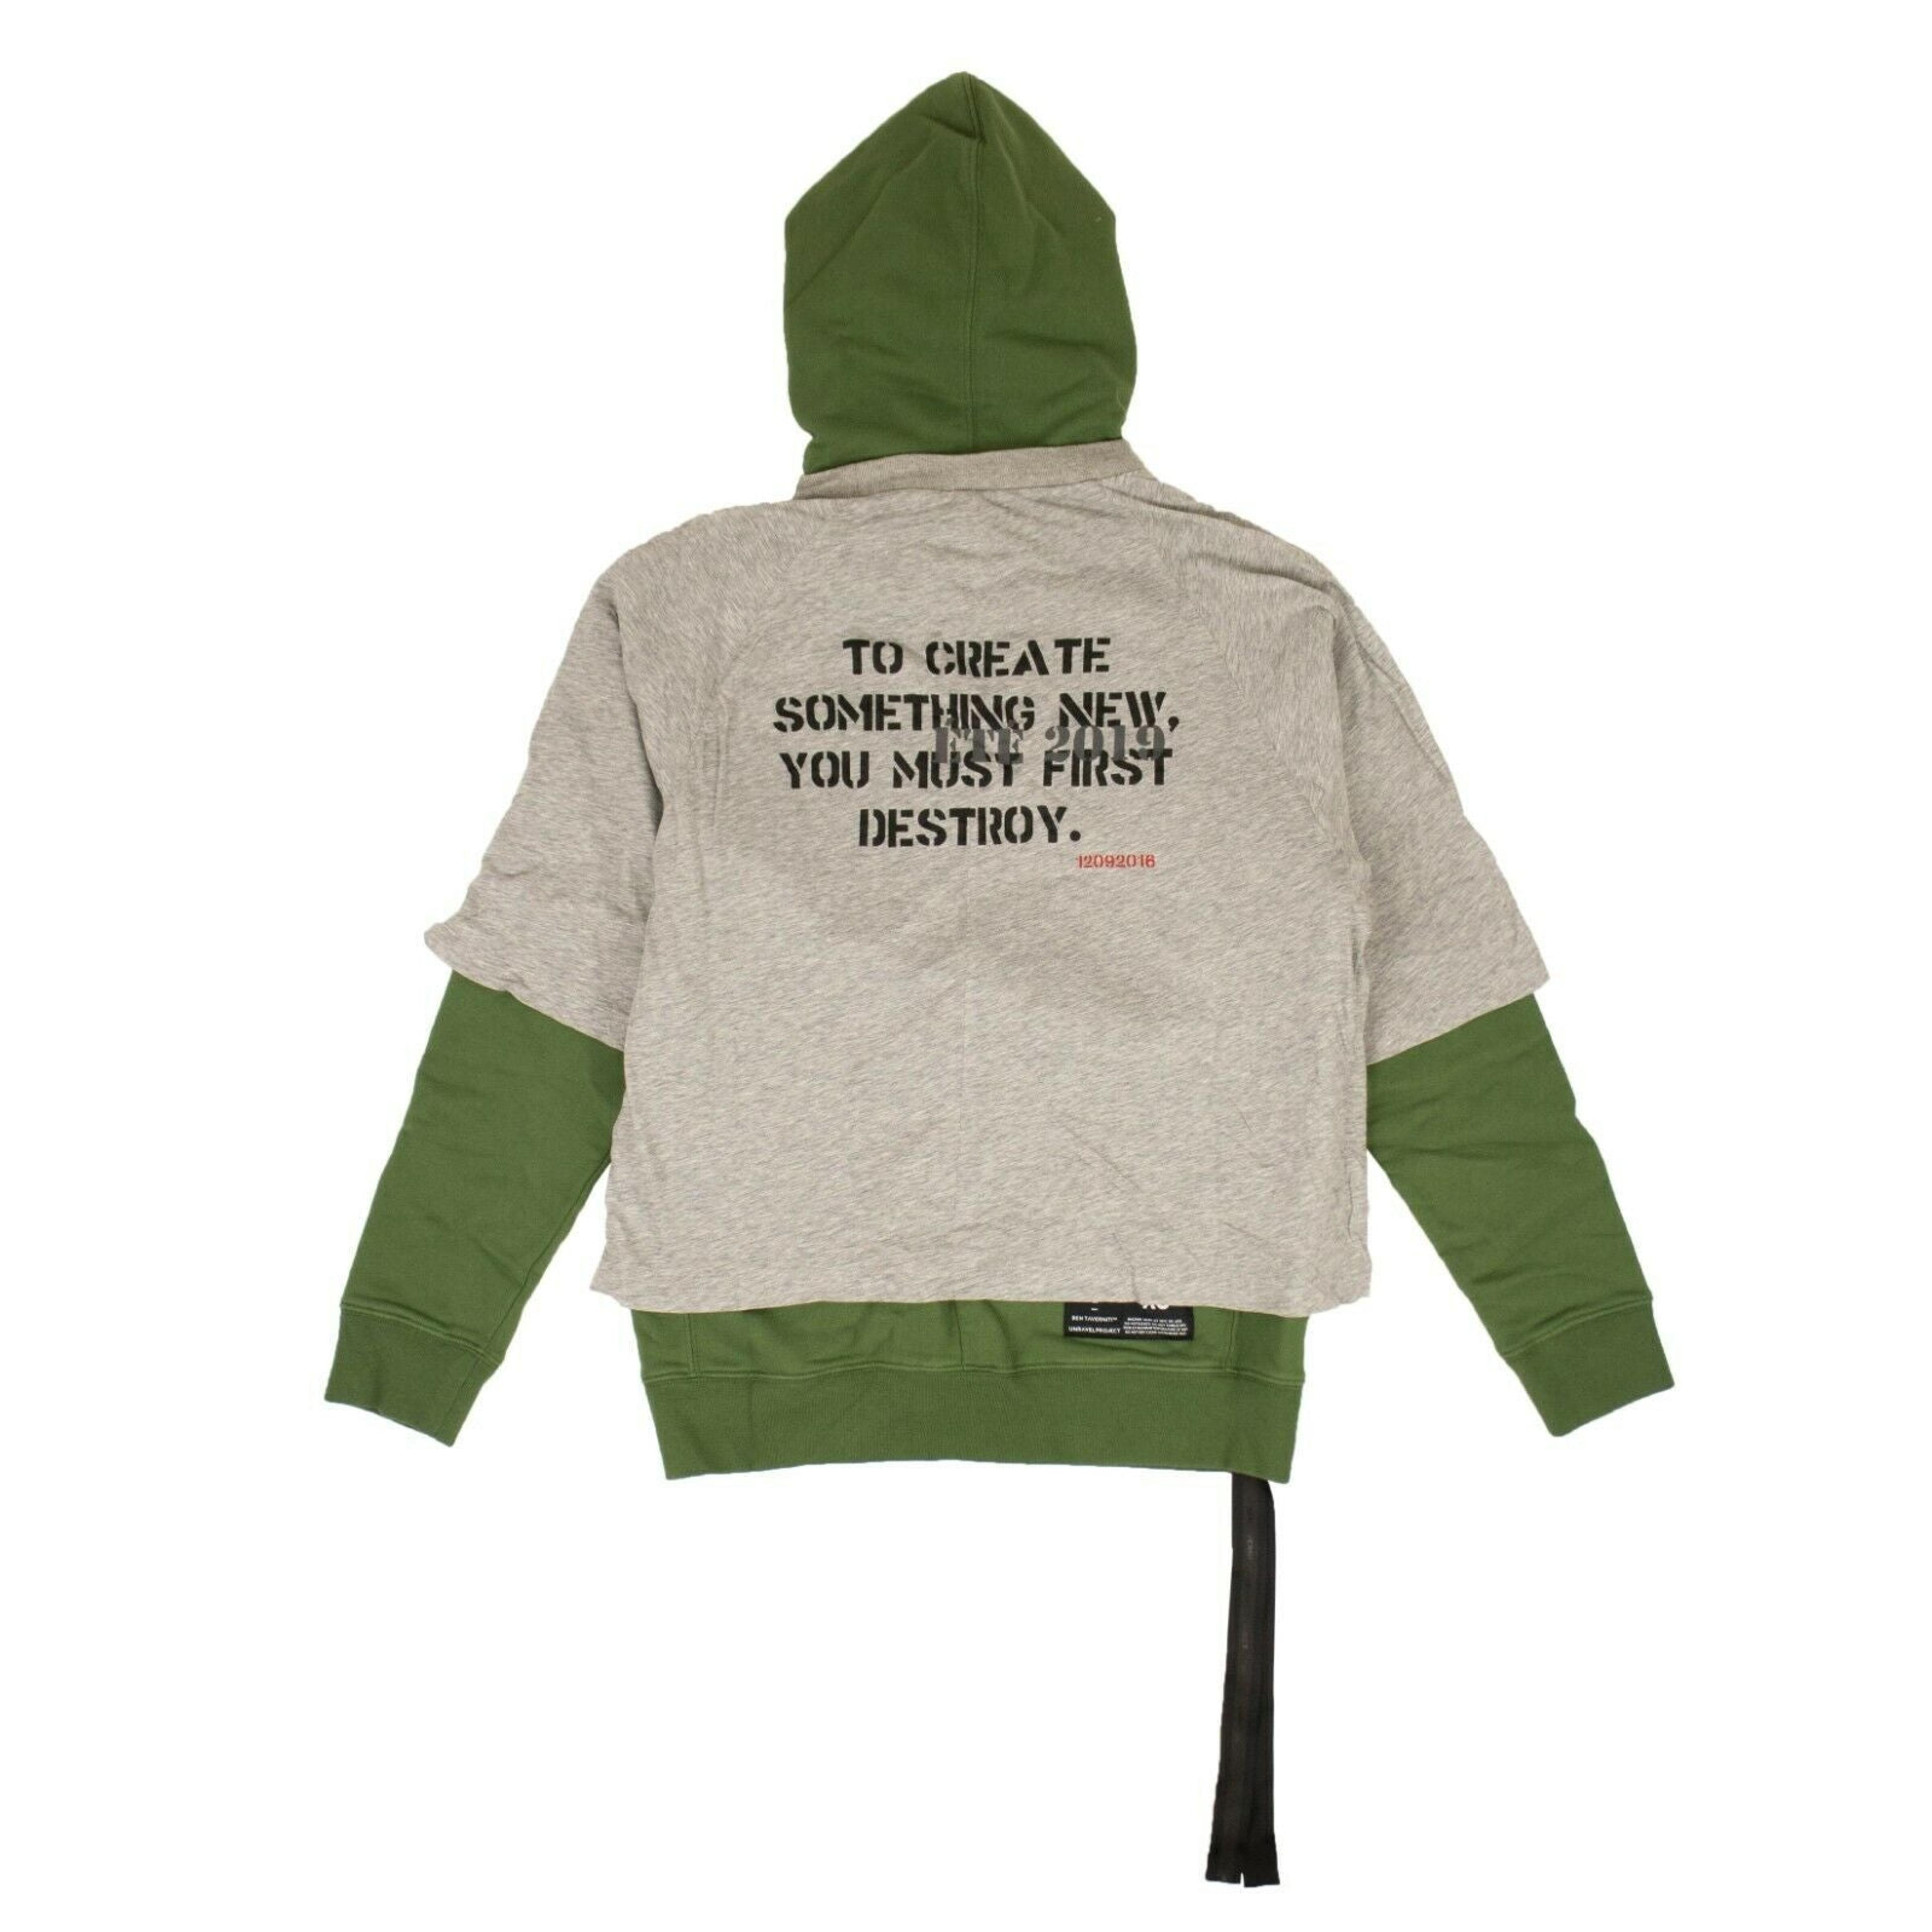 Alternate View 1 of Green And Gray Layered Hoodie